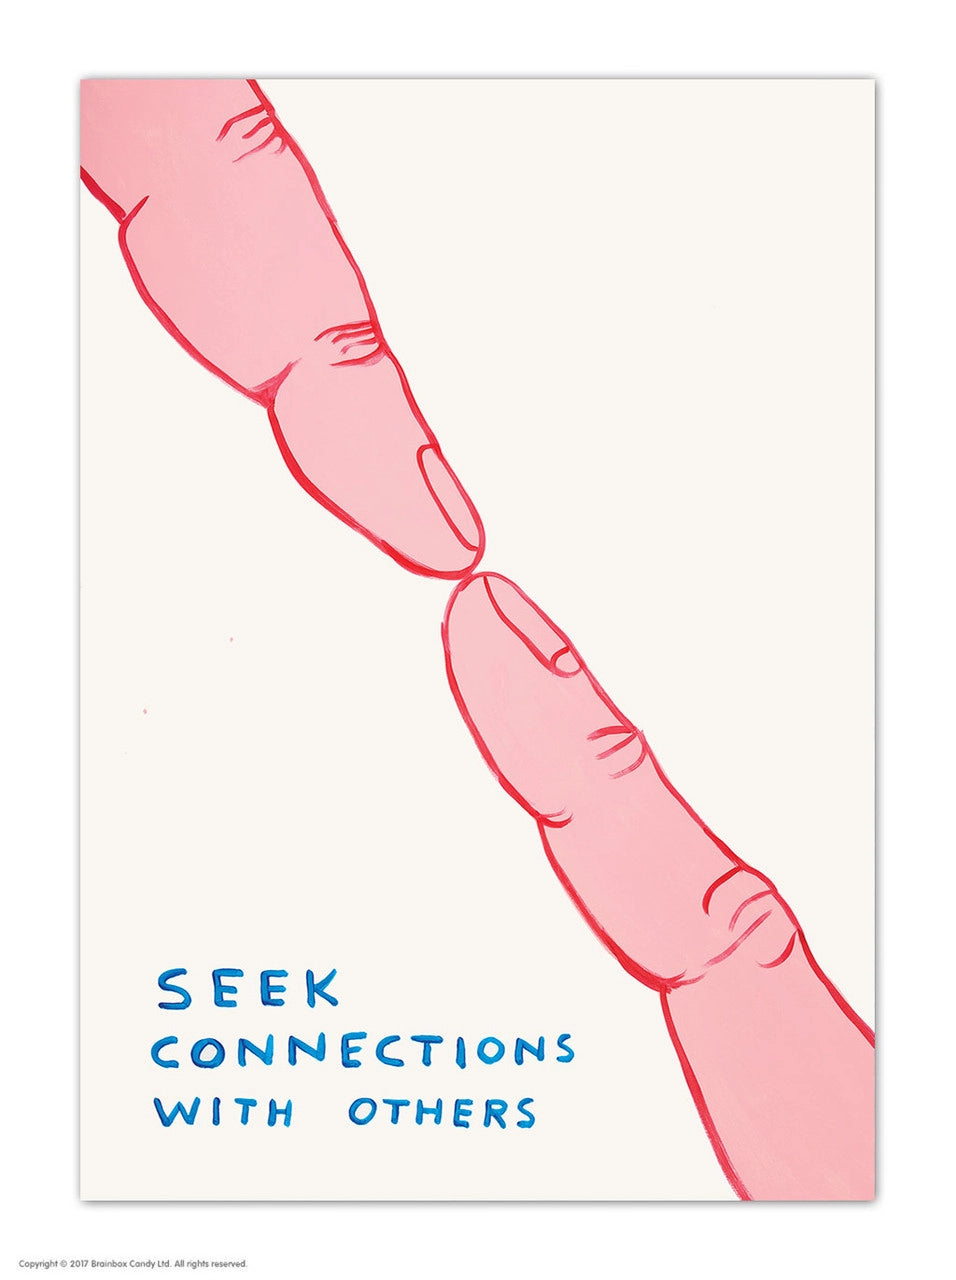 Seek Connections With Others David Shrigley Postcard